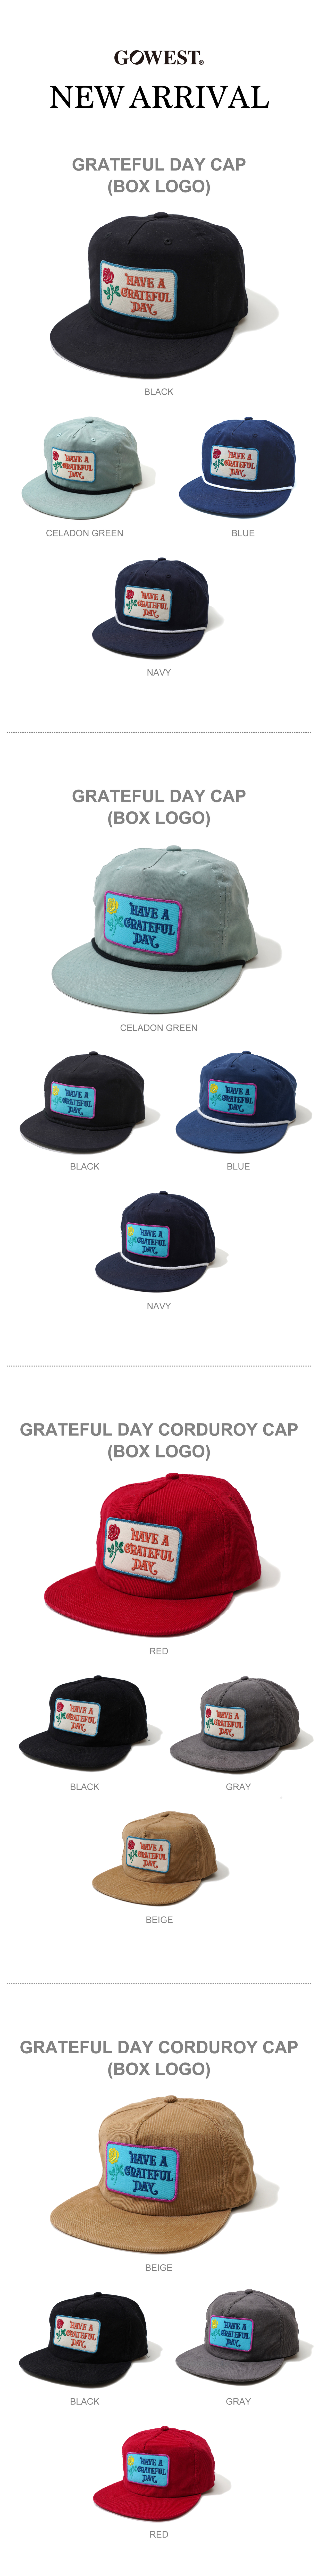 【HAVE A GRATEFUL DAY】GRATEFUL DAY CAP を入荷しました